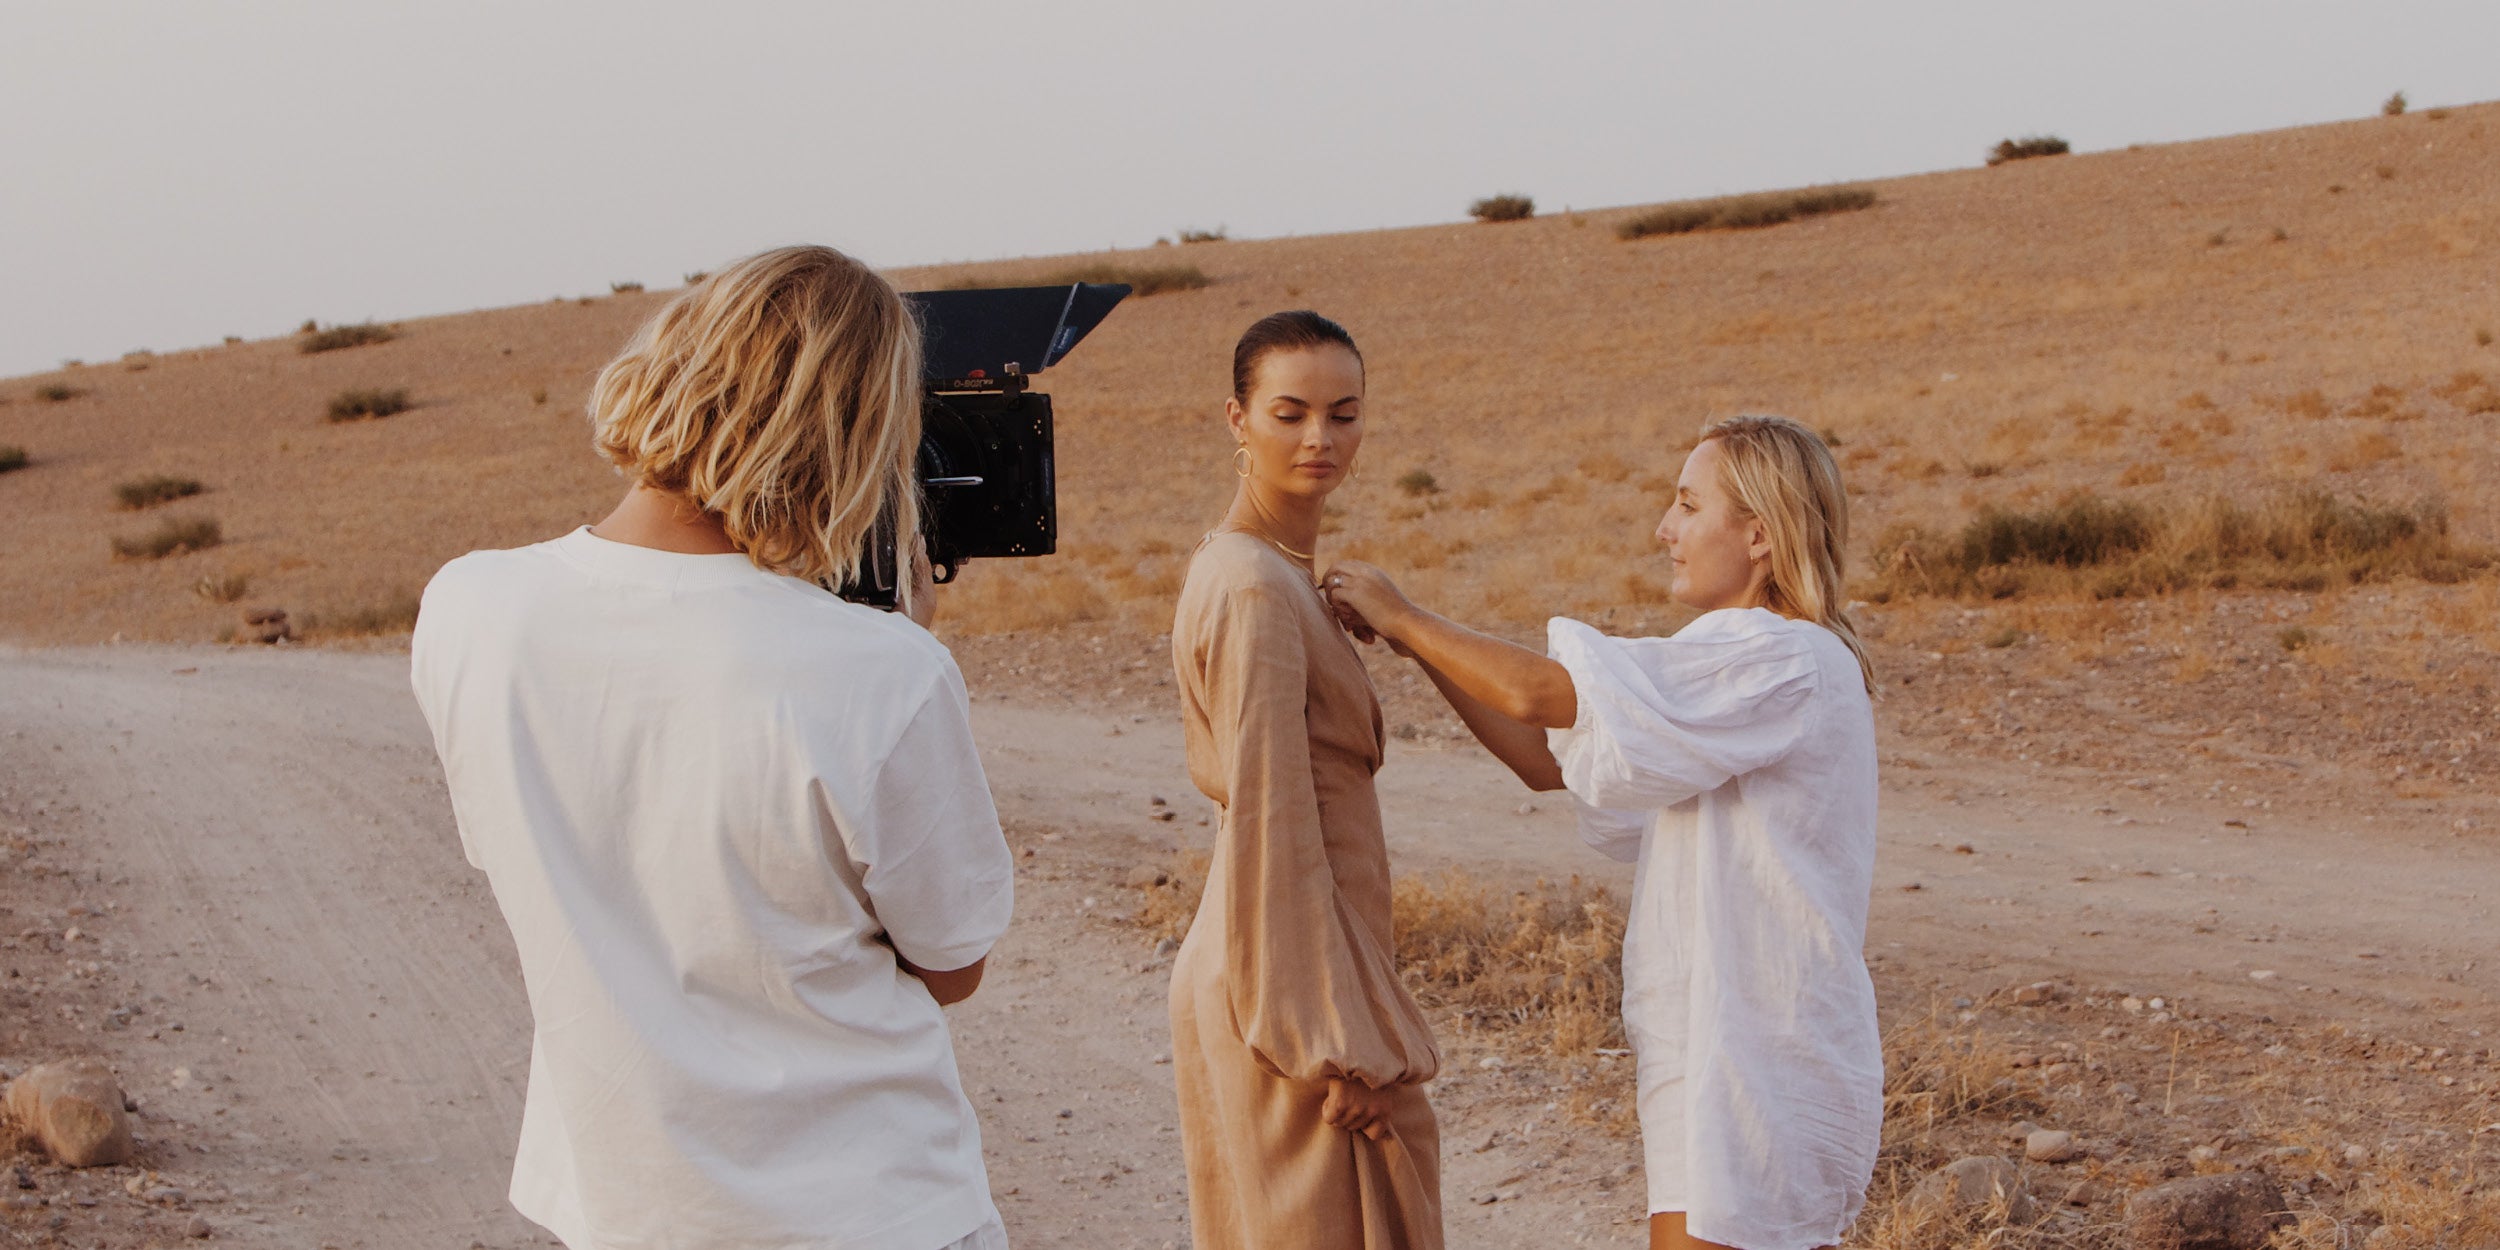 Behind The Scenes in Morocco: She Collection